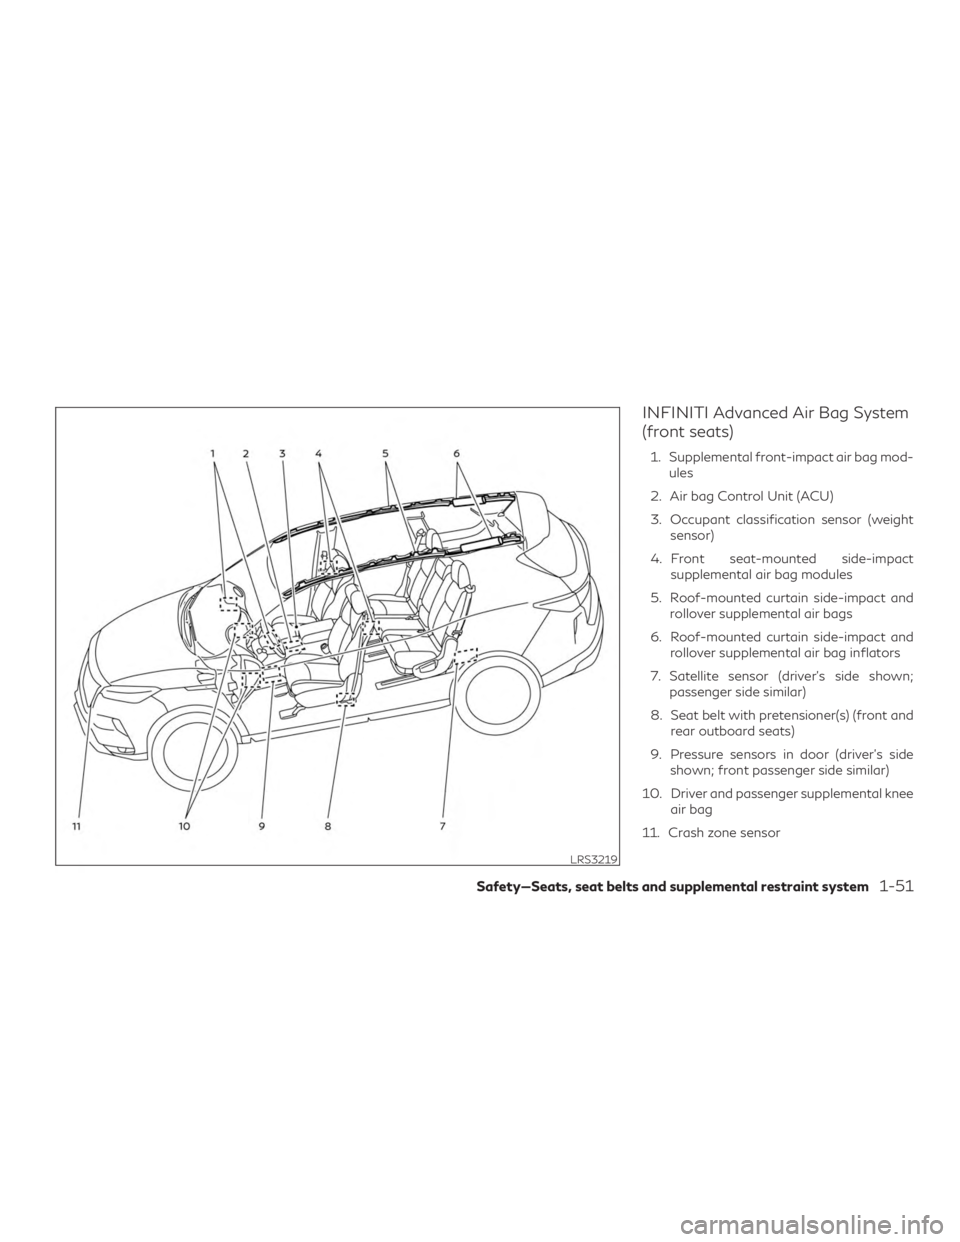 INFINITI QX50 2020  Owners Manual INFINITI Advanced Air Bag System
(front seats)
1. Supplemental front-impact air bag mod-ules
2. Air bag Control Unit (ACU)
3. Occupant classification sensor (weight sensor)
4. Front seat-mounted side-